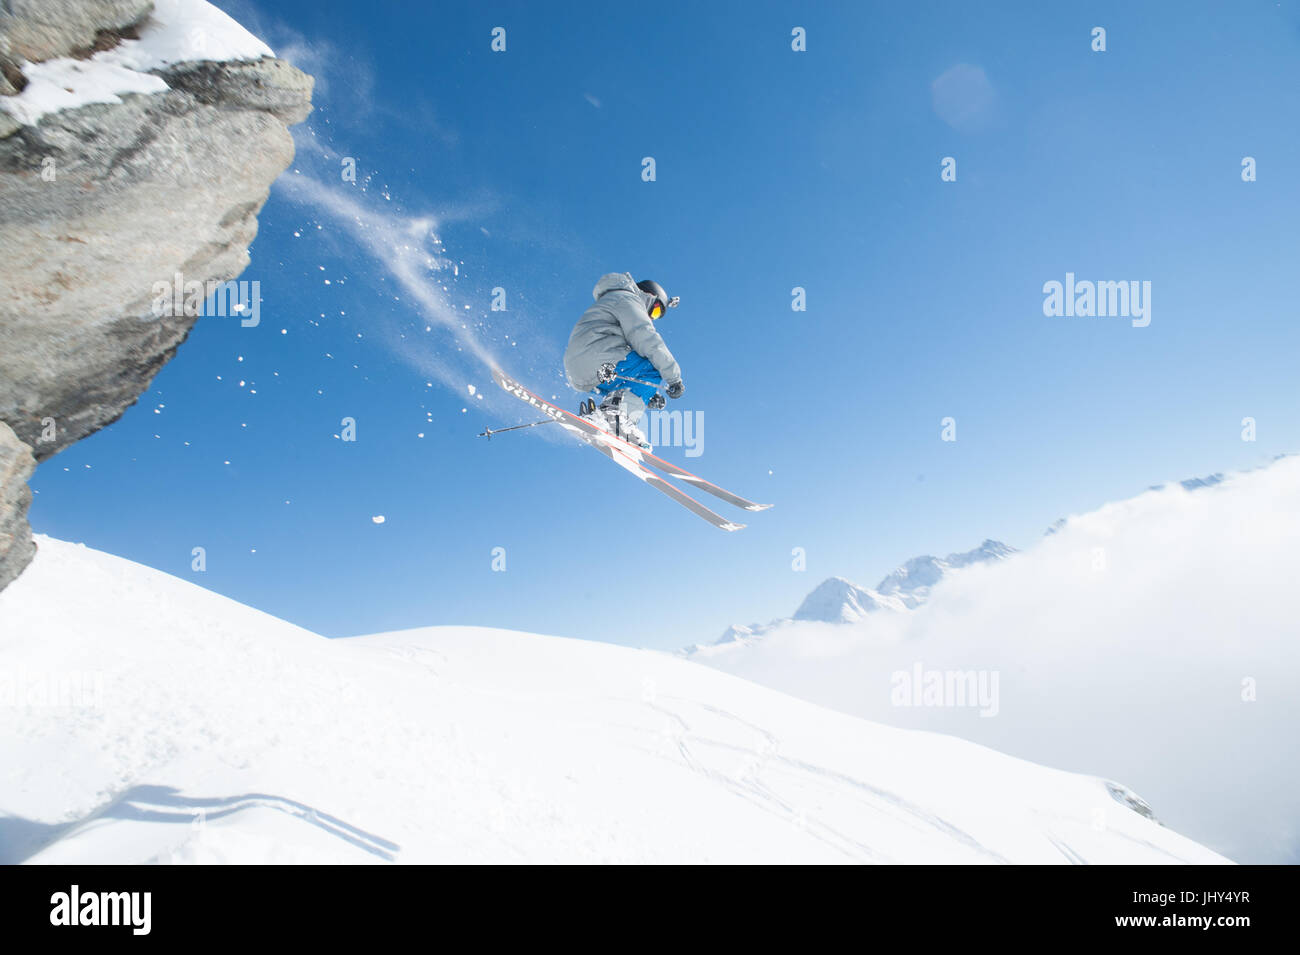 Skier going over a cliff trailing a spray of snow Stock Photo